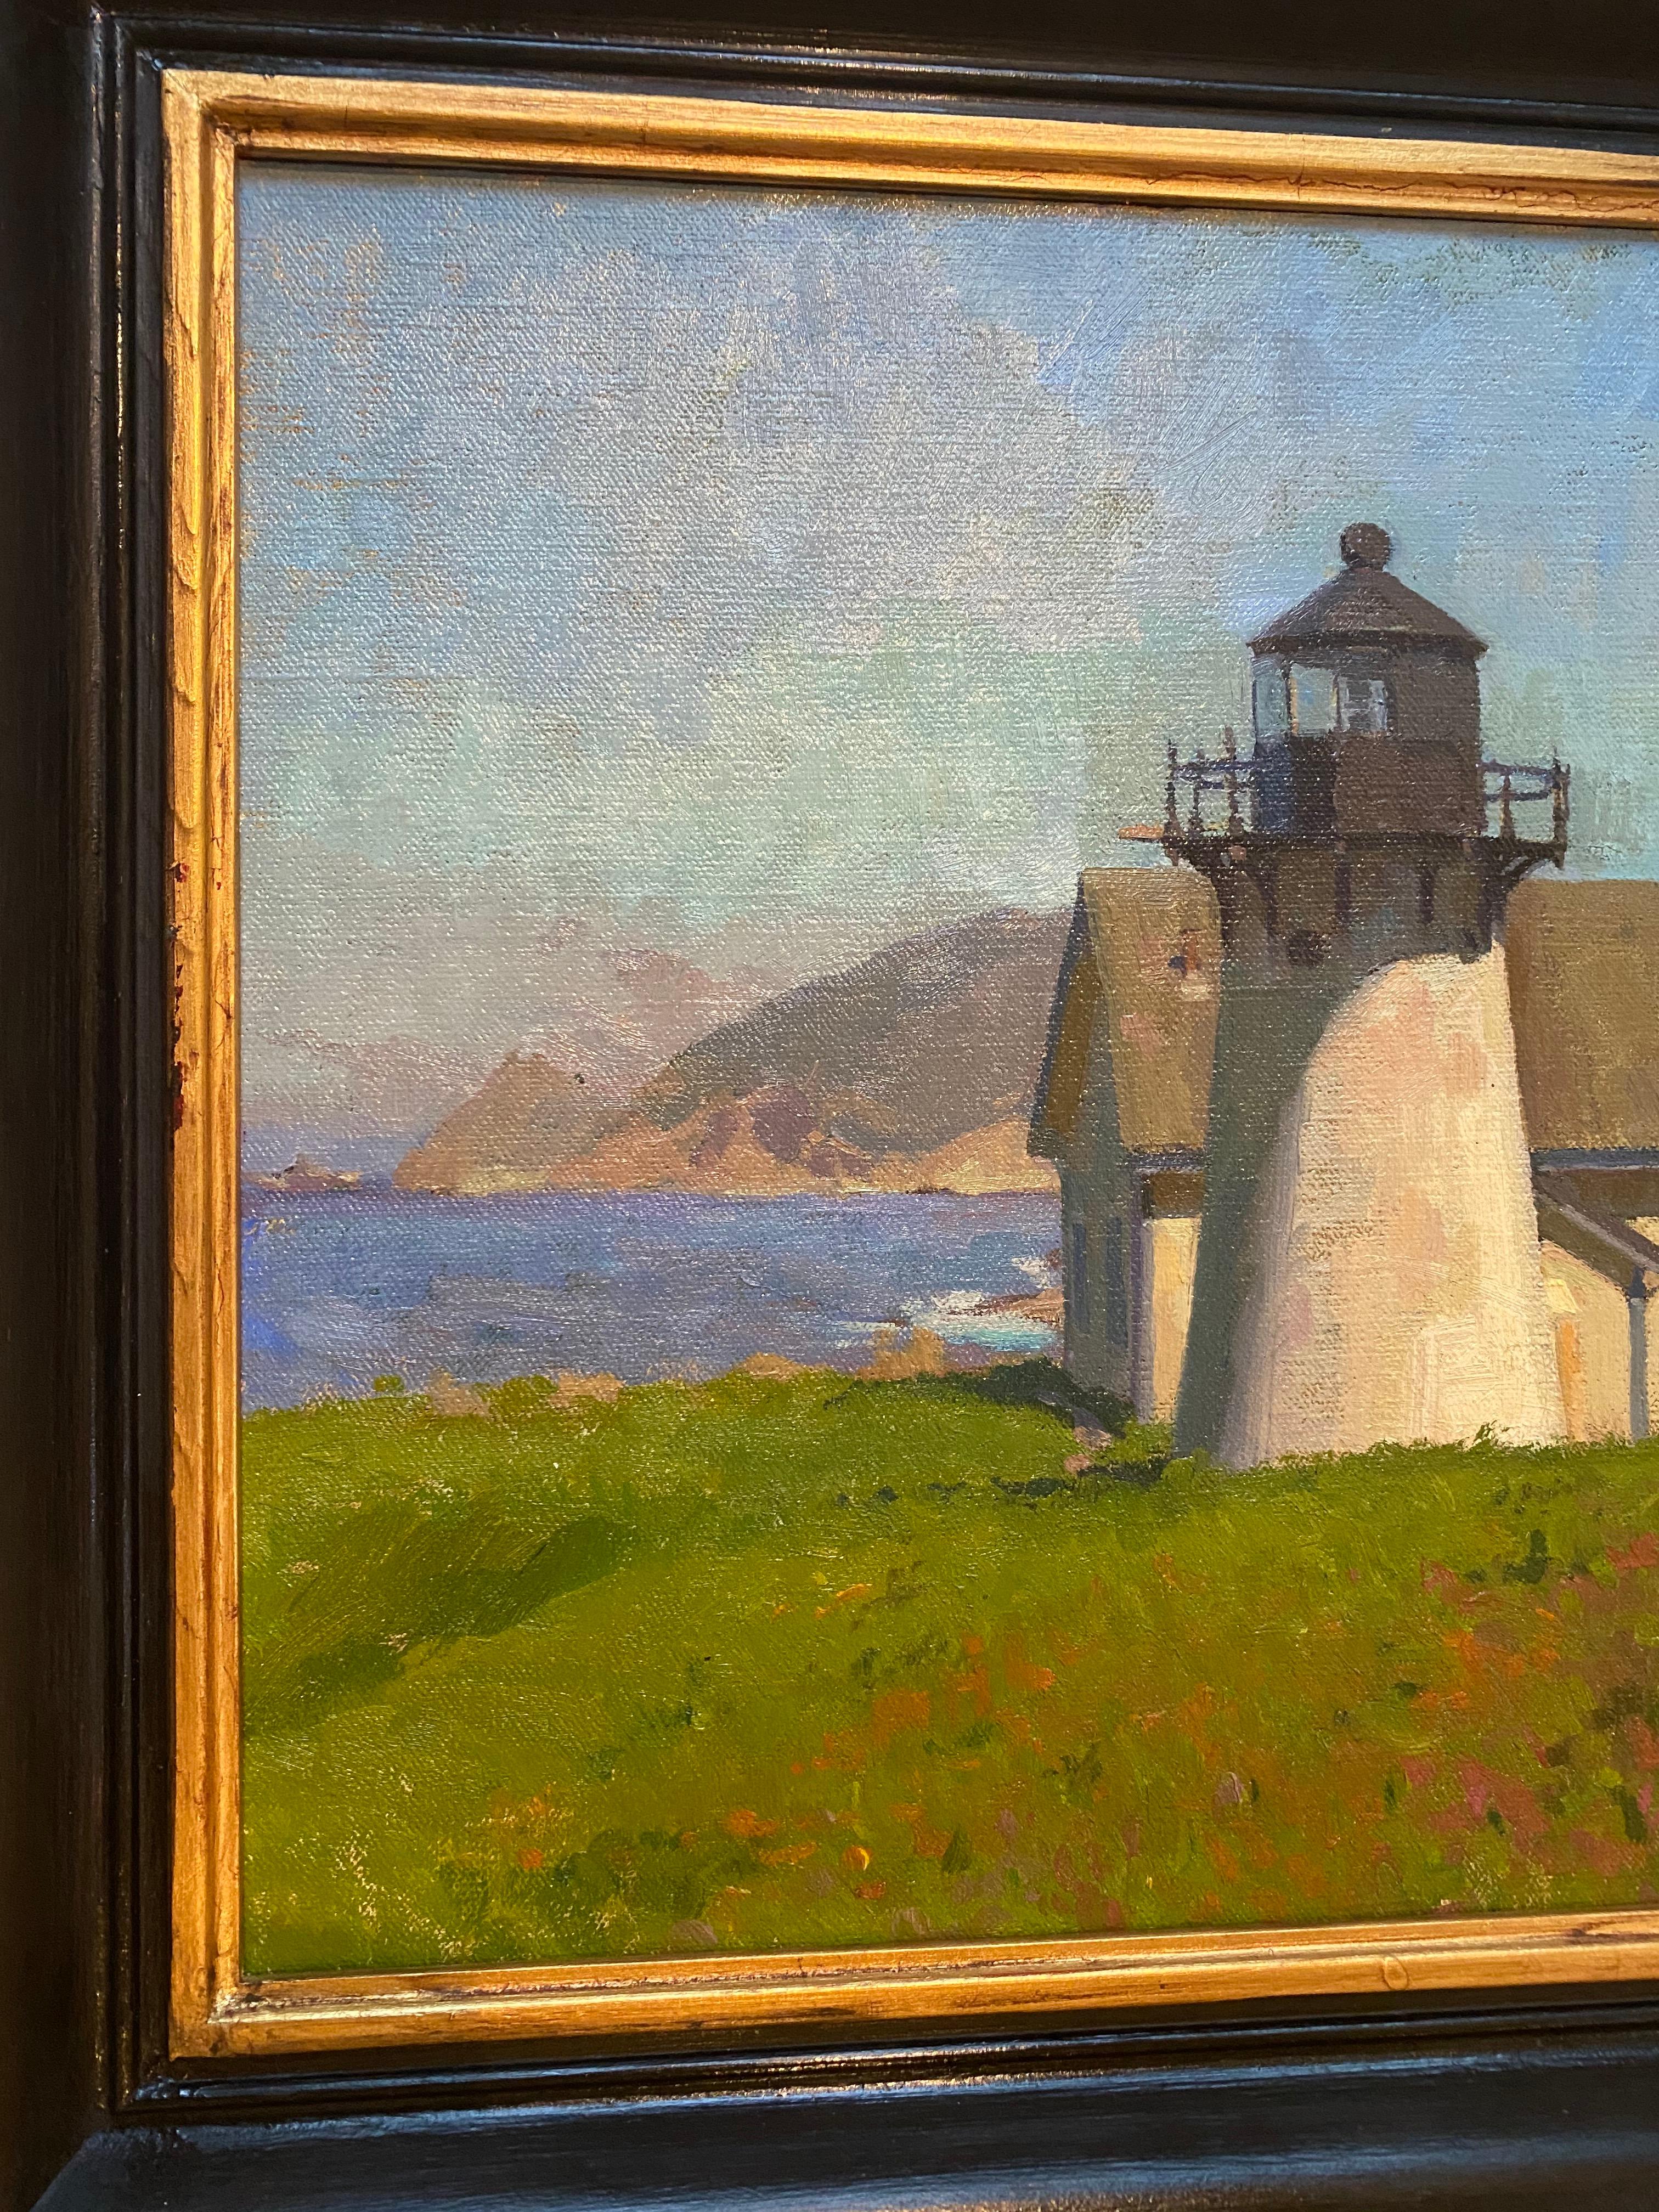 An oil painting of a light house in mid day in California. 

Signed 